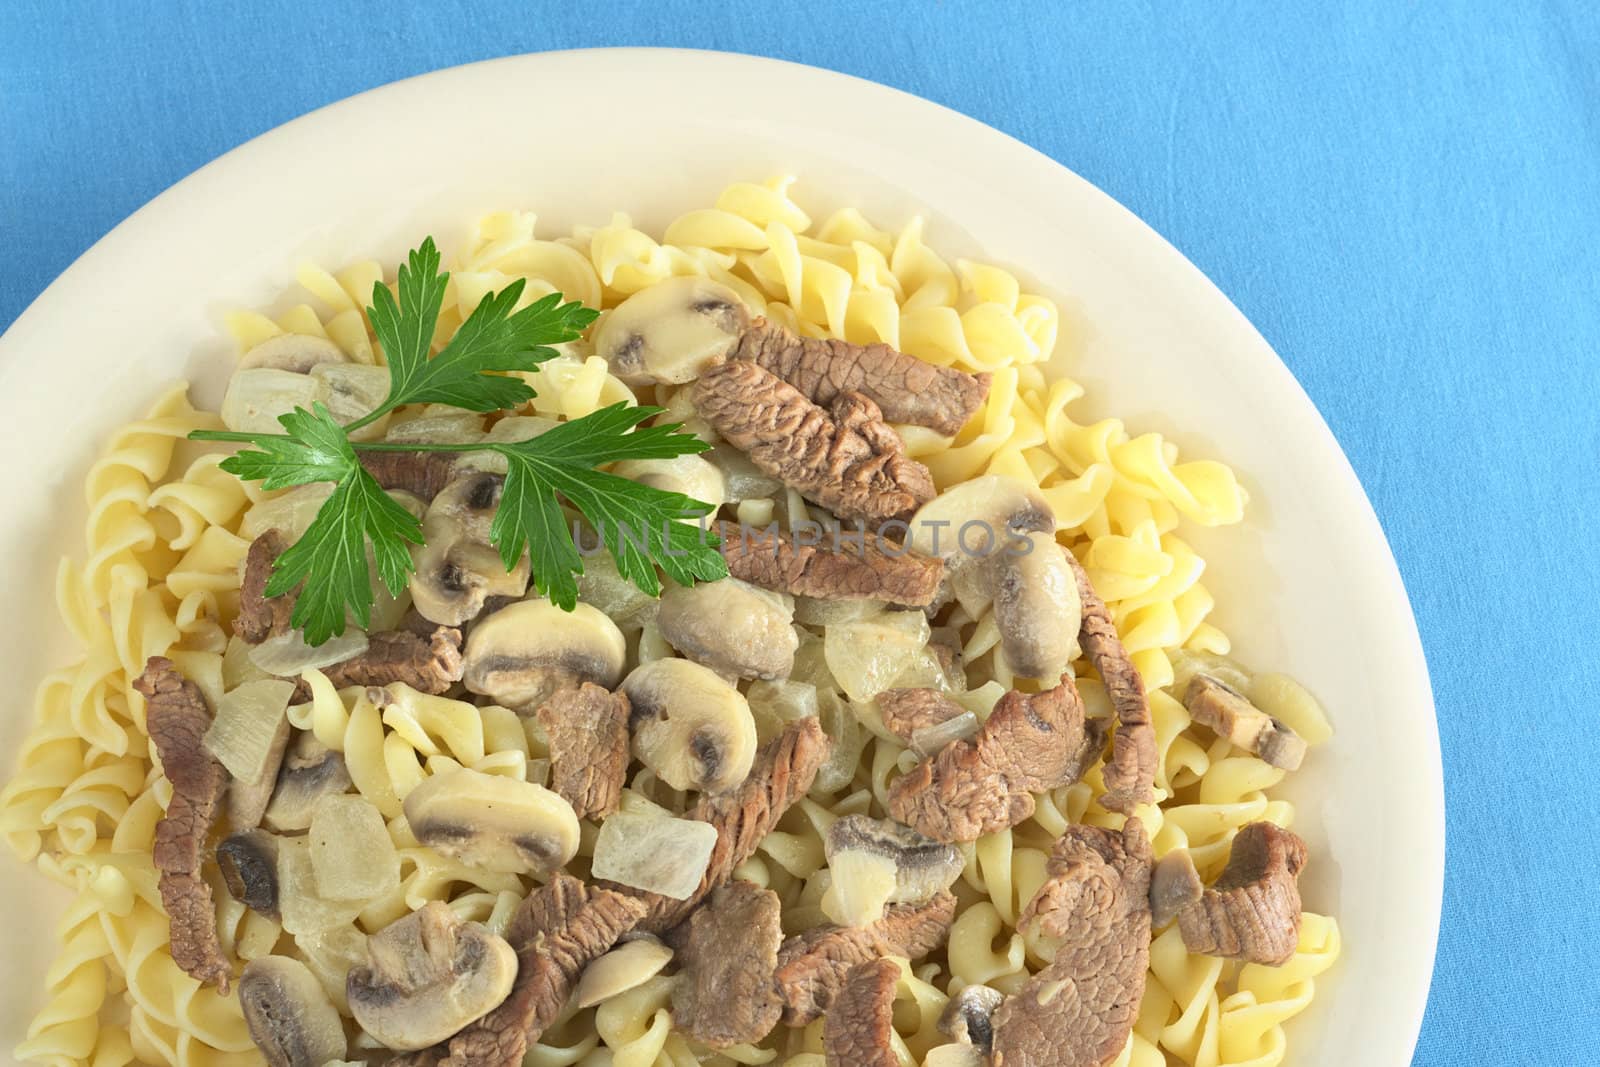 Veal strips with white mushrooms and onion in cream sauce served on fusilli pasta and garnished with a parsley leaf (Selective Focus, Focus on the parsley leaf and its surroundings)